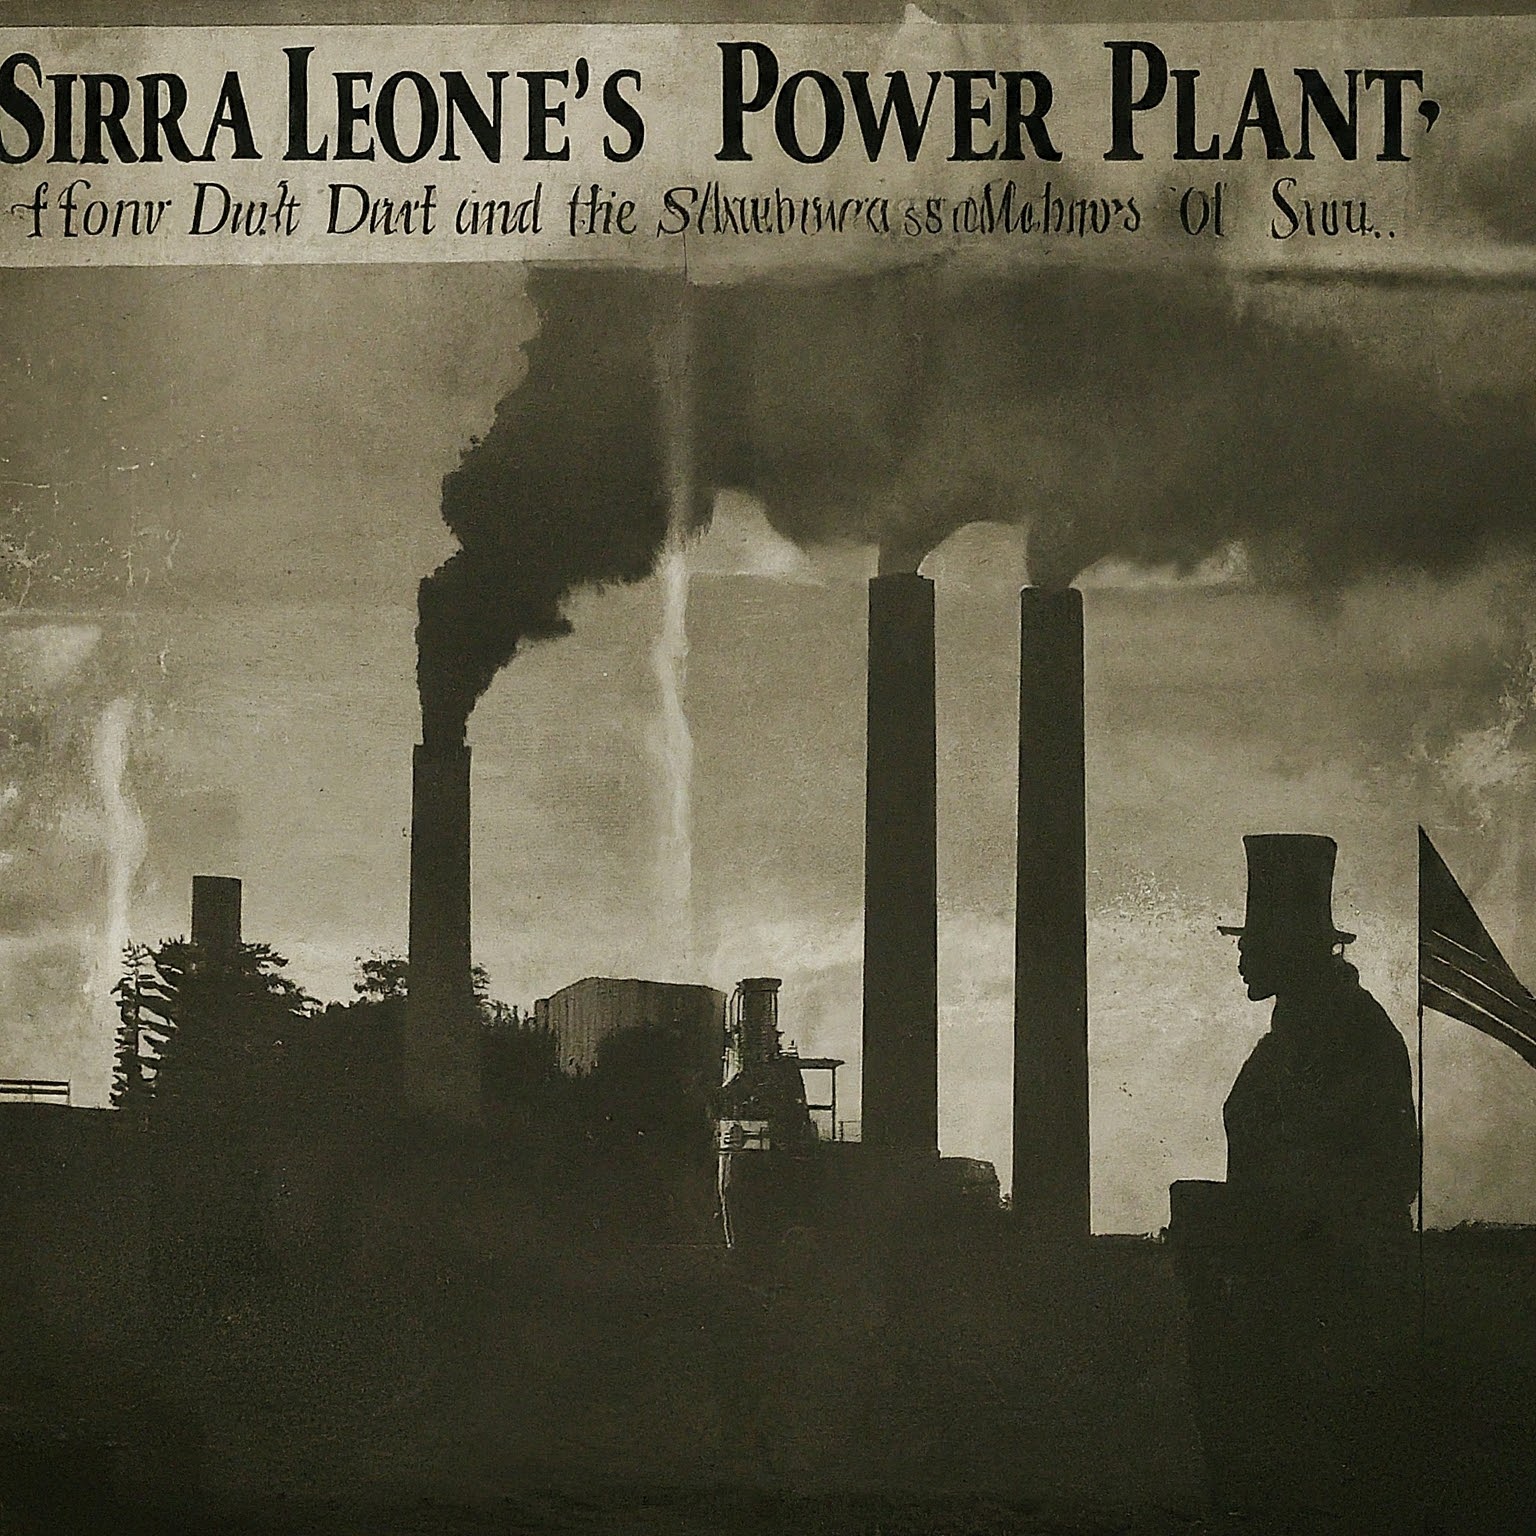 Sierra Leone's Power Plant: The Debt and the Shadows of Uncle Sam